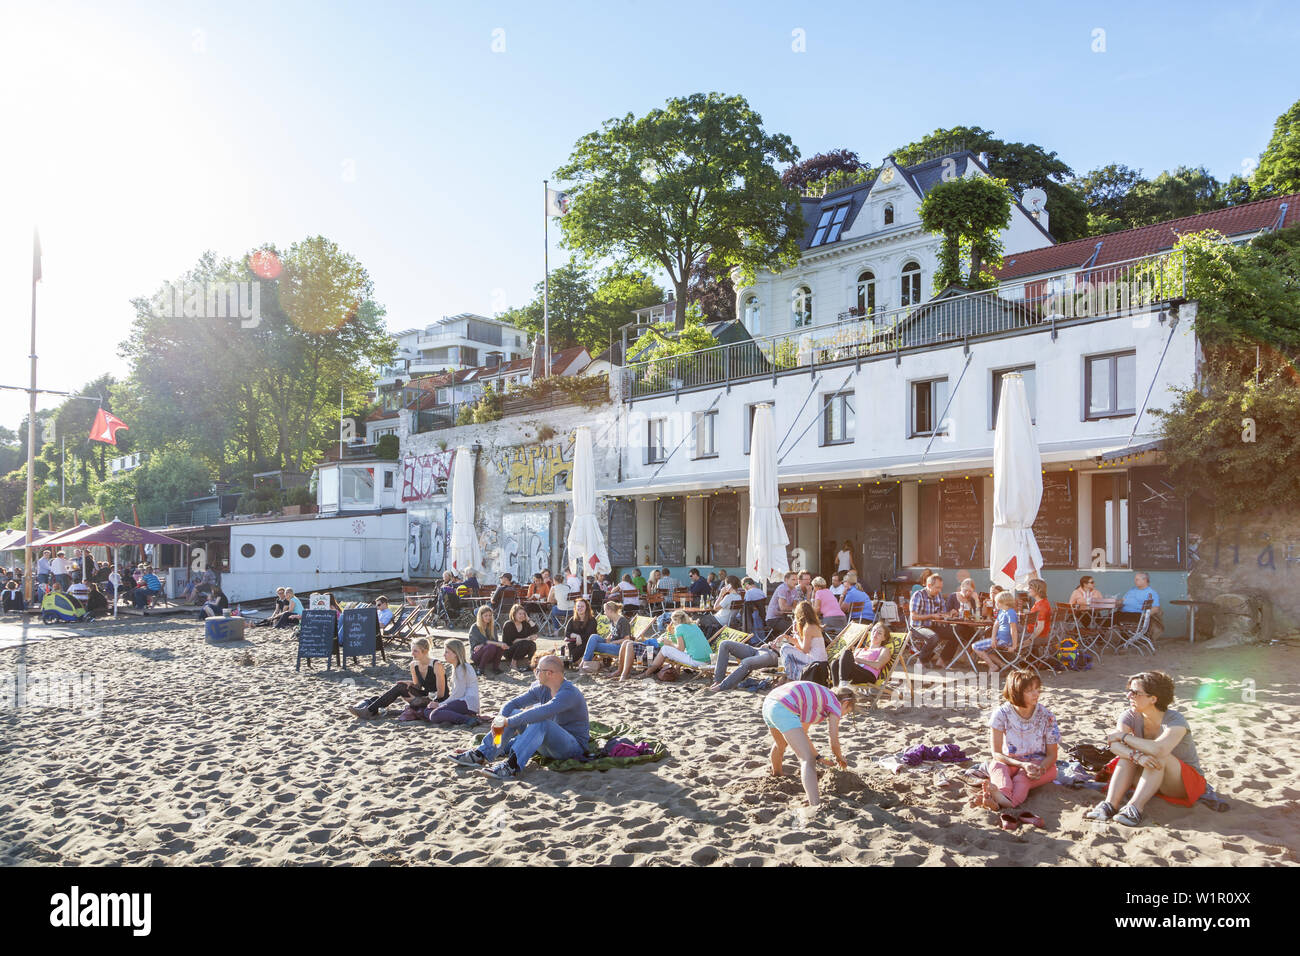 Beach in front of the bar Strandperle by the river Elbe, didtrict Övelgönne, Hanseatic City of Hamburg, Northern Germany, Germany, Europe Stock Photo